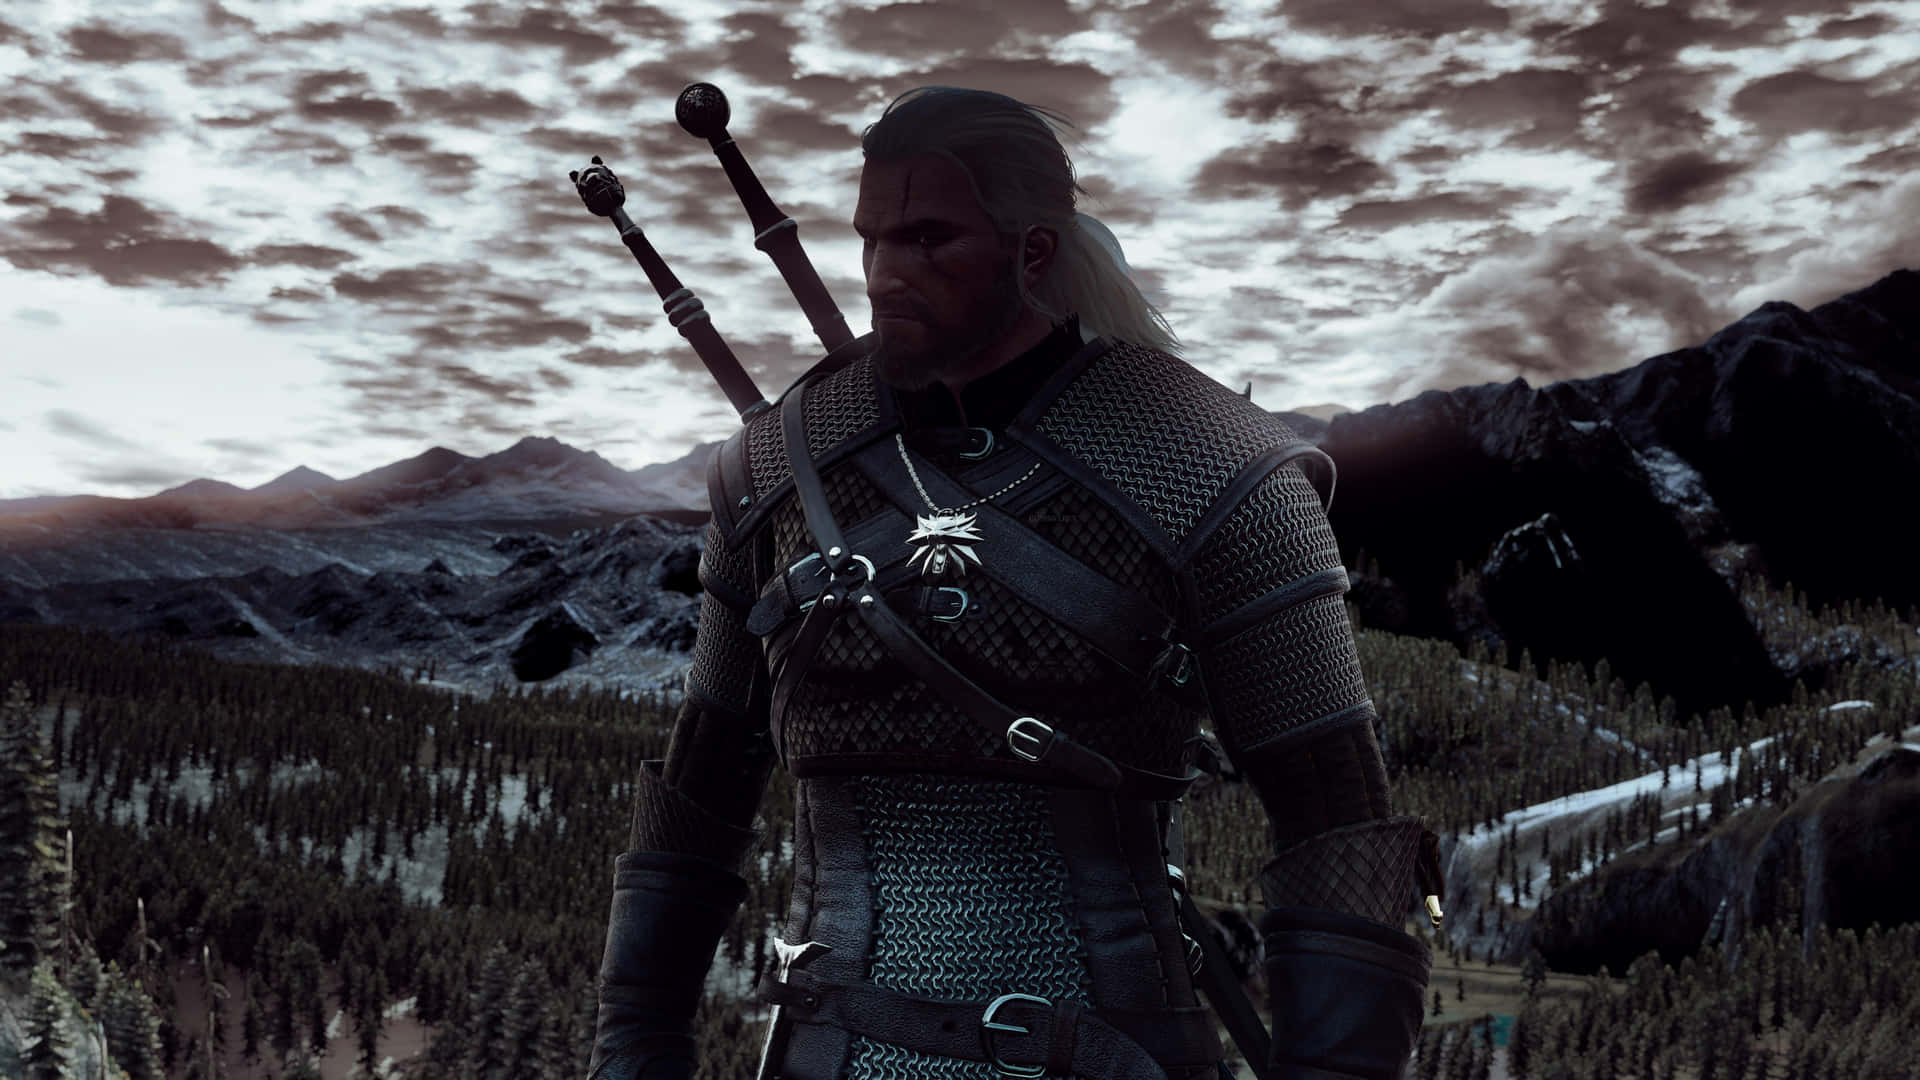 Geralt of Rivia - The Witcher in Action